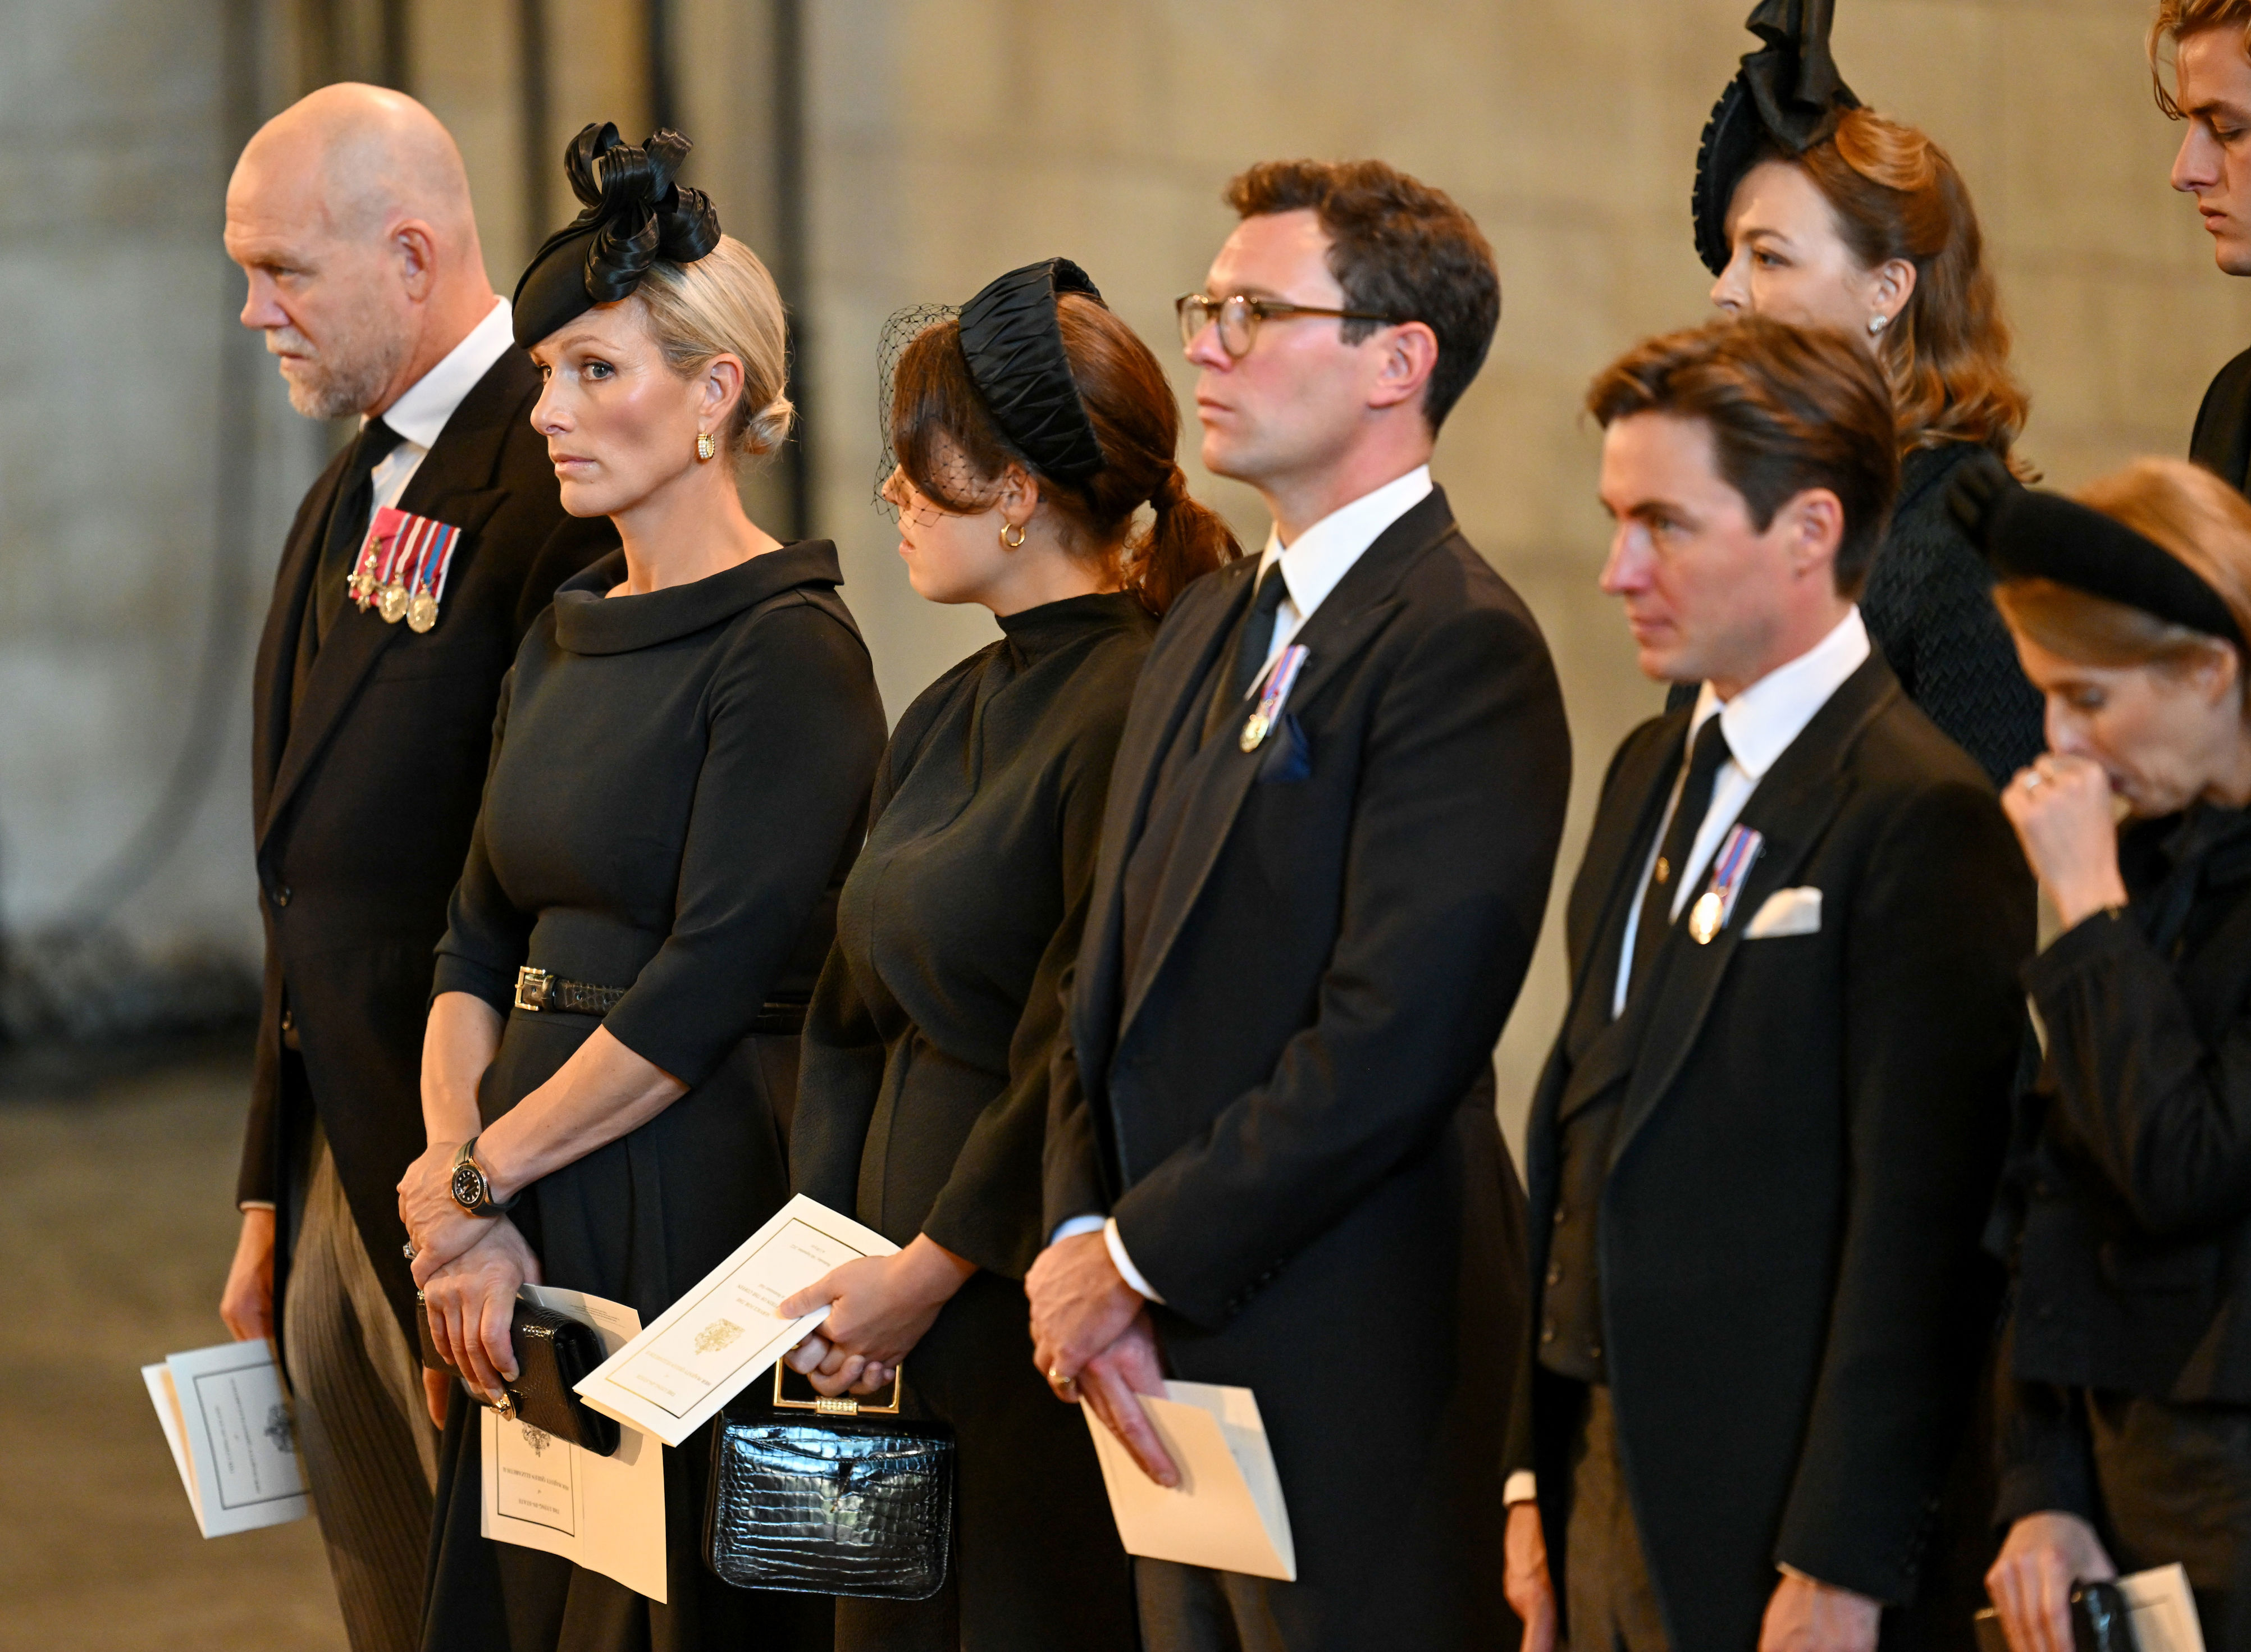 <p>Mike Tindall and wife Zara Tindall, Princess Eugenie and husband Jack Brooksbank and Edoardo Mapelli Mozzi paid their respects in the Palace of Westminster in London on Sept. 14, 2022, after Queen Elizabeth II's coffin arrived from Buckingham Palace to begin her lying-in-state five days ahead of her funeral.</p>